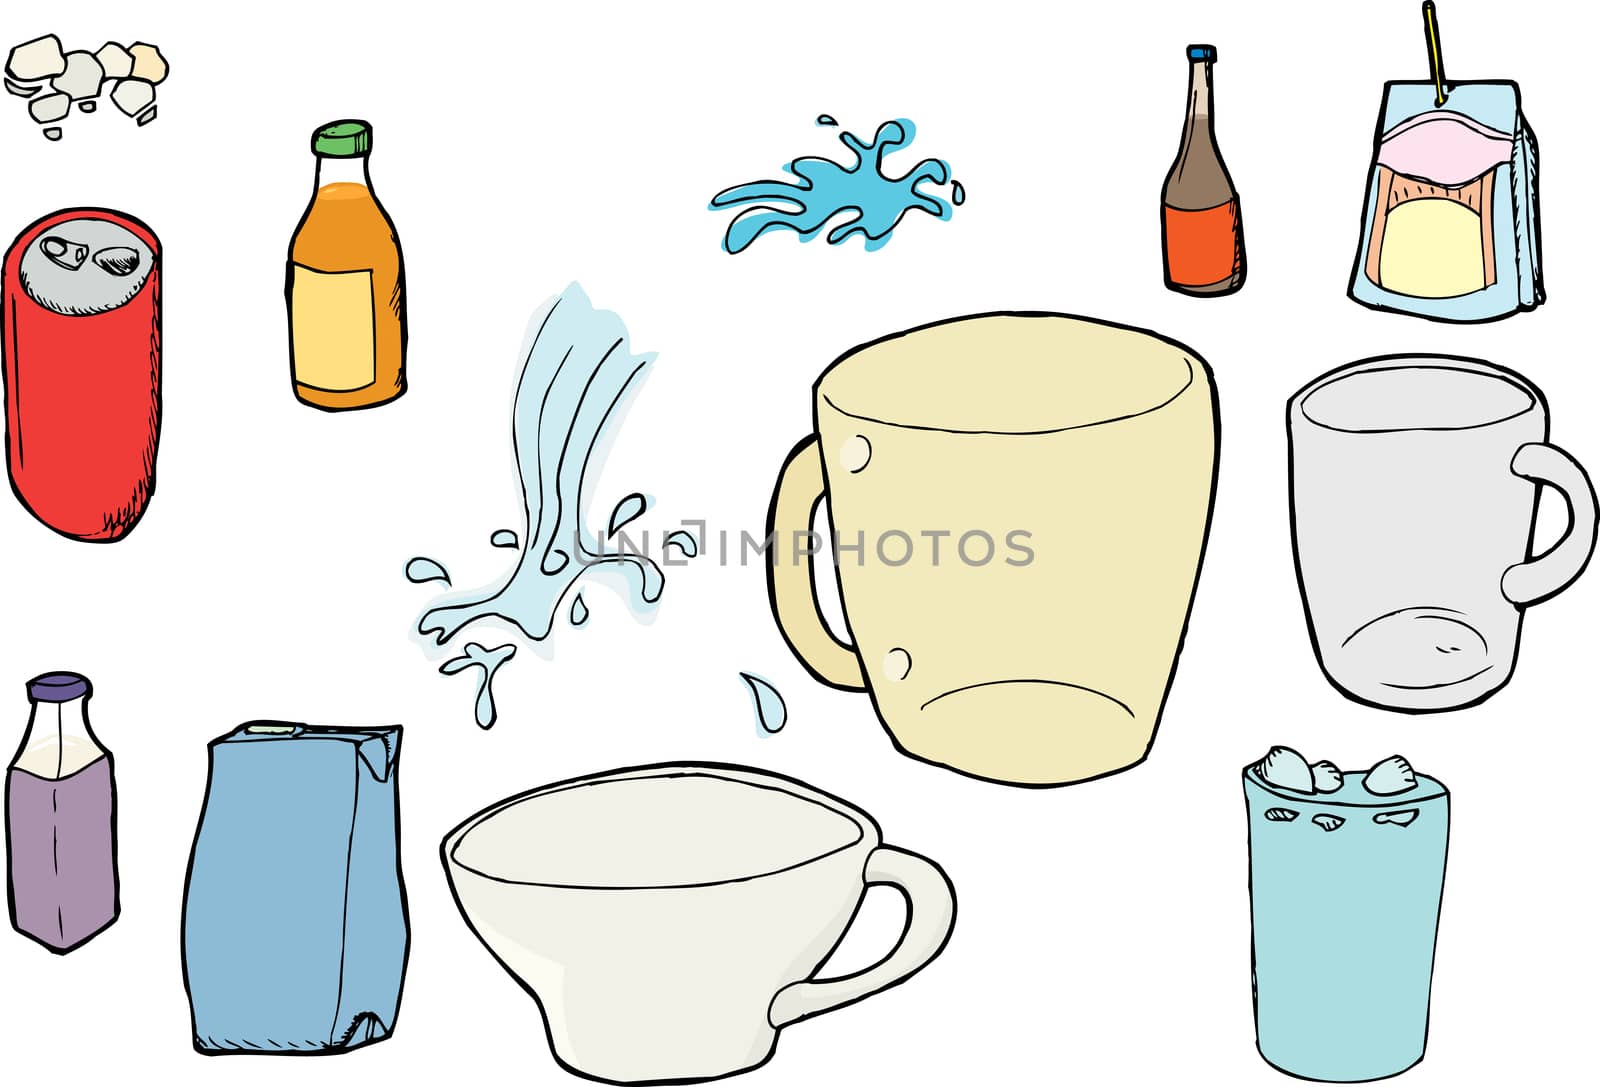 Assorted beverage cups and containers with splashes and ice